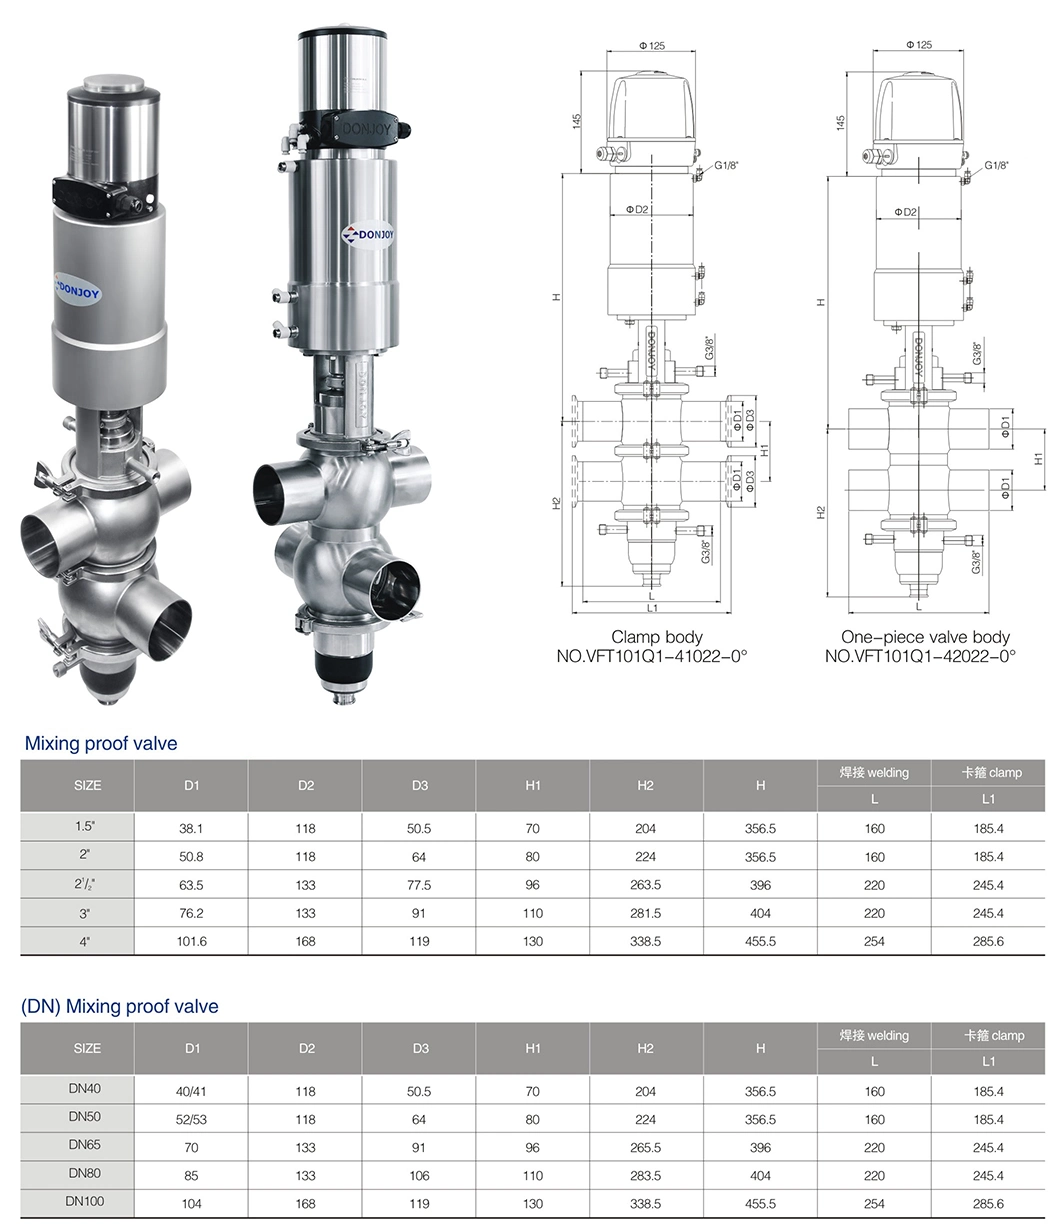 Hygienic Mix Proof Valve Mainford for Diary Industry